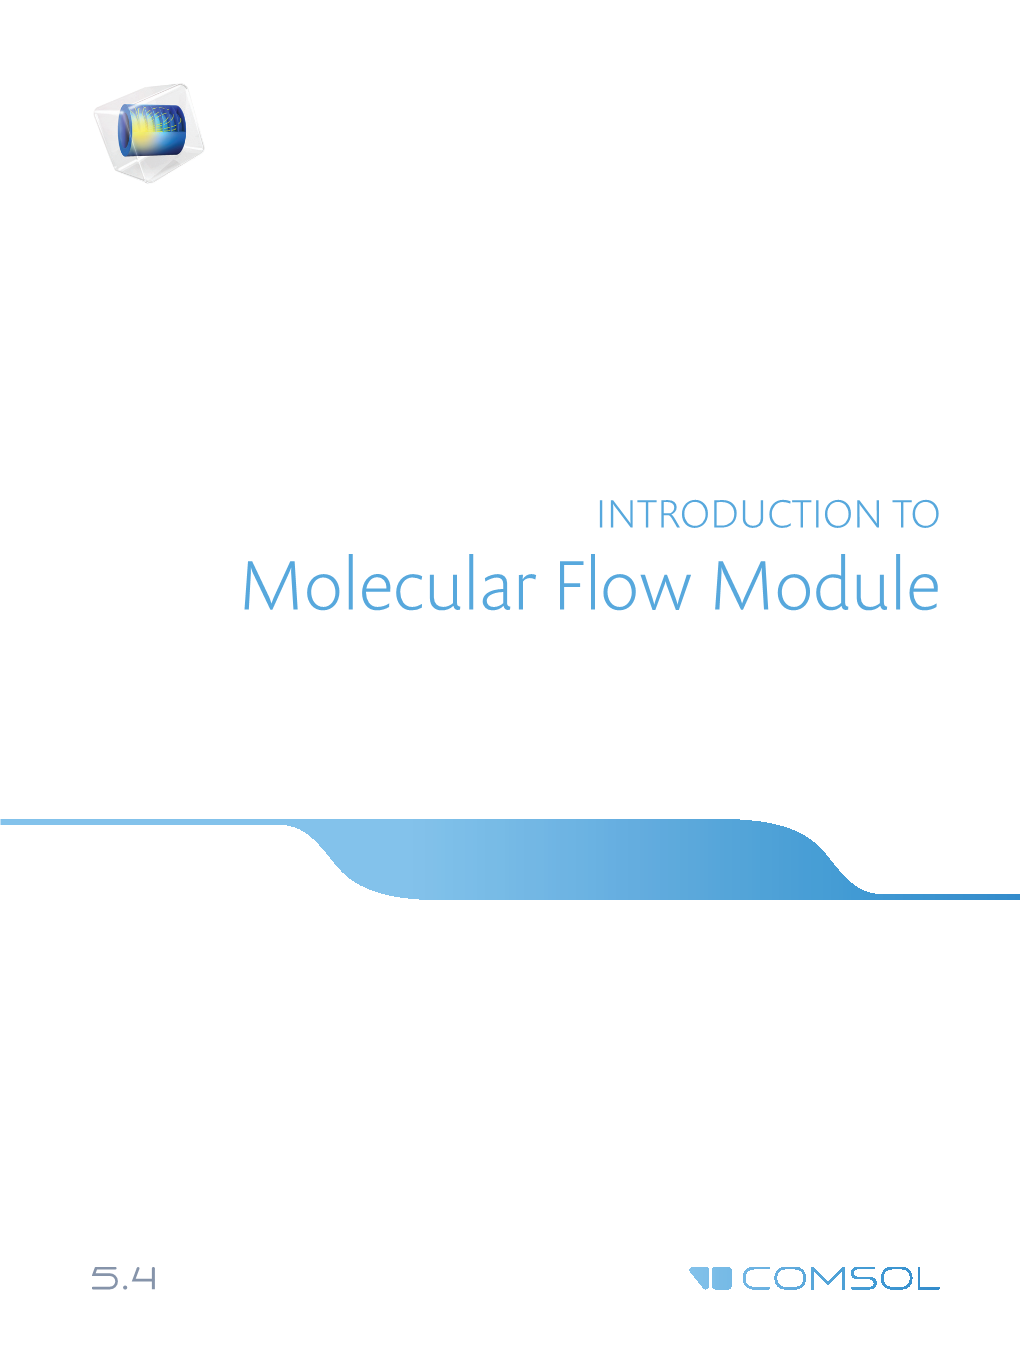 Introduction to the Molecular Flow Module